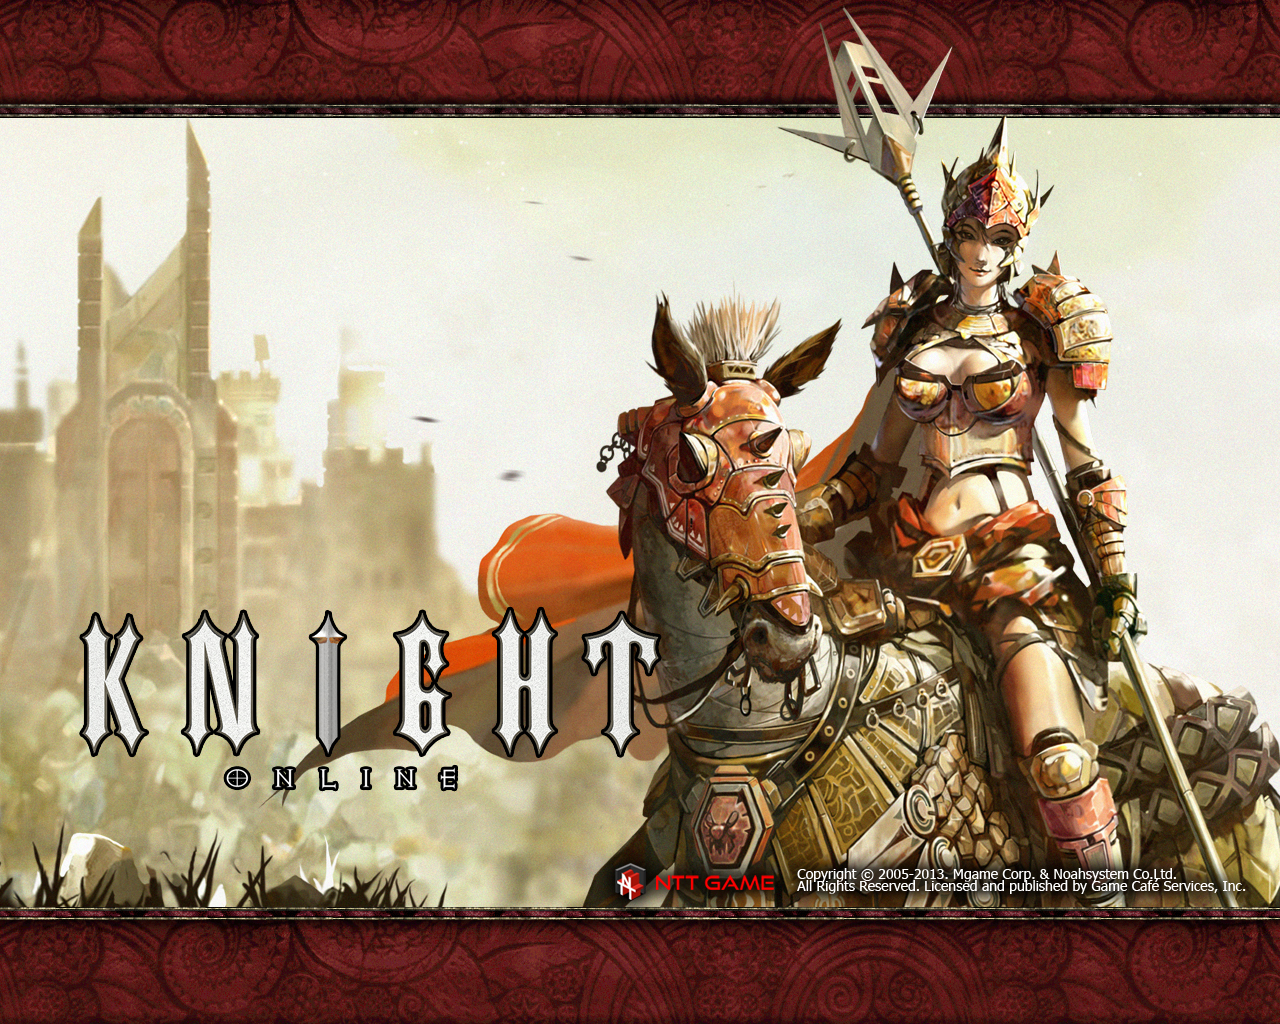 knight online wallpaper,action adventure game,games,adventure game,strategy video game,pc game